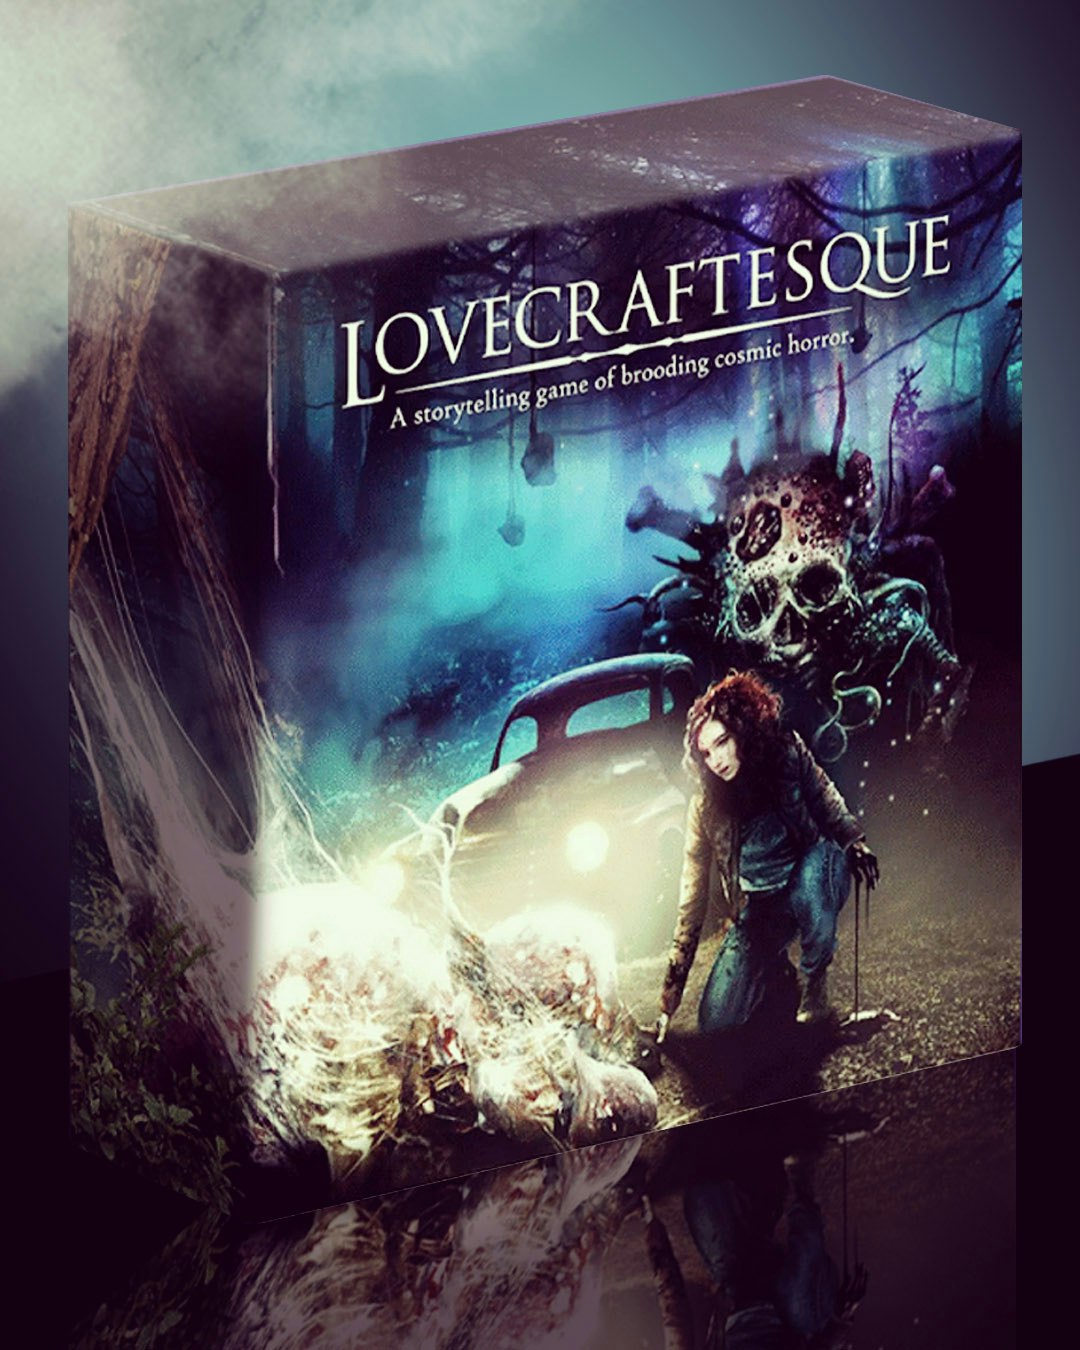 A mock up of the Lovecraftesque core box